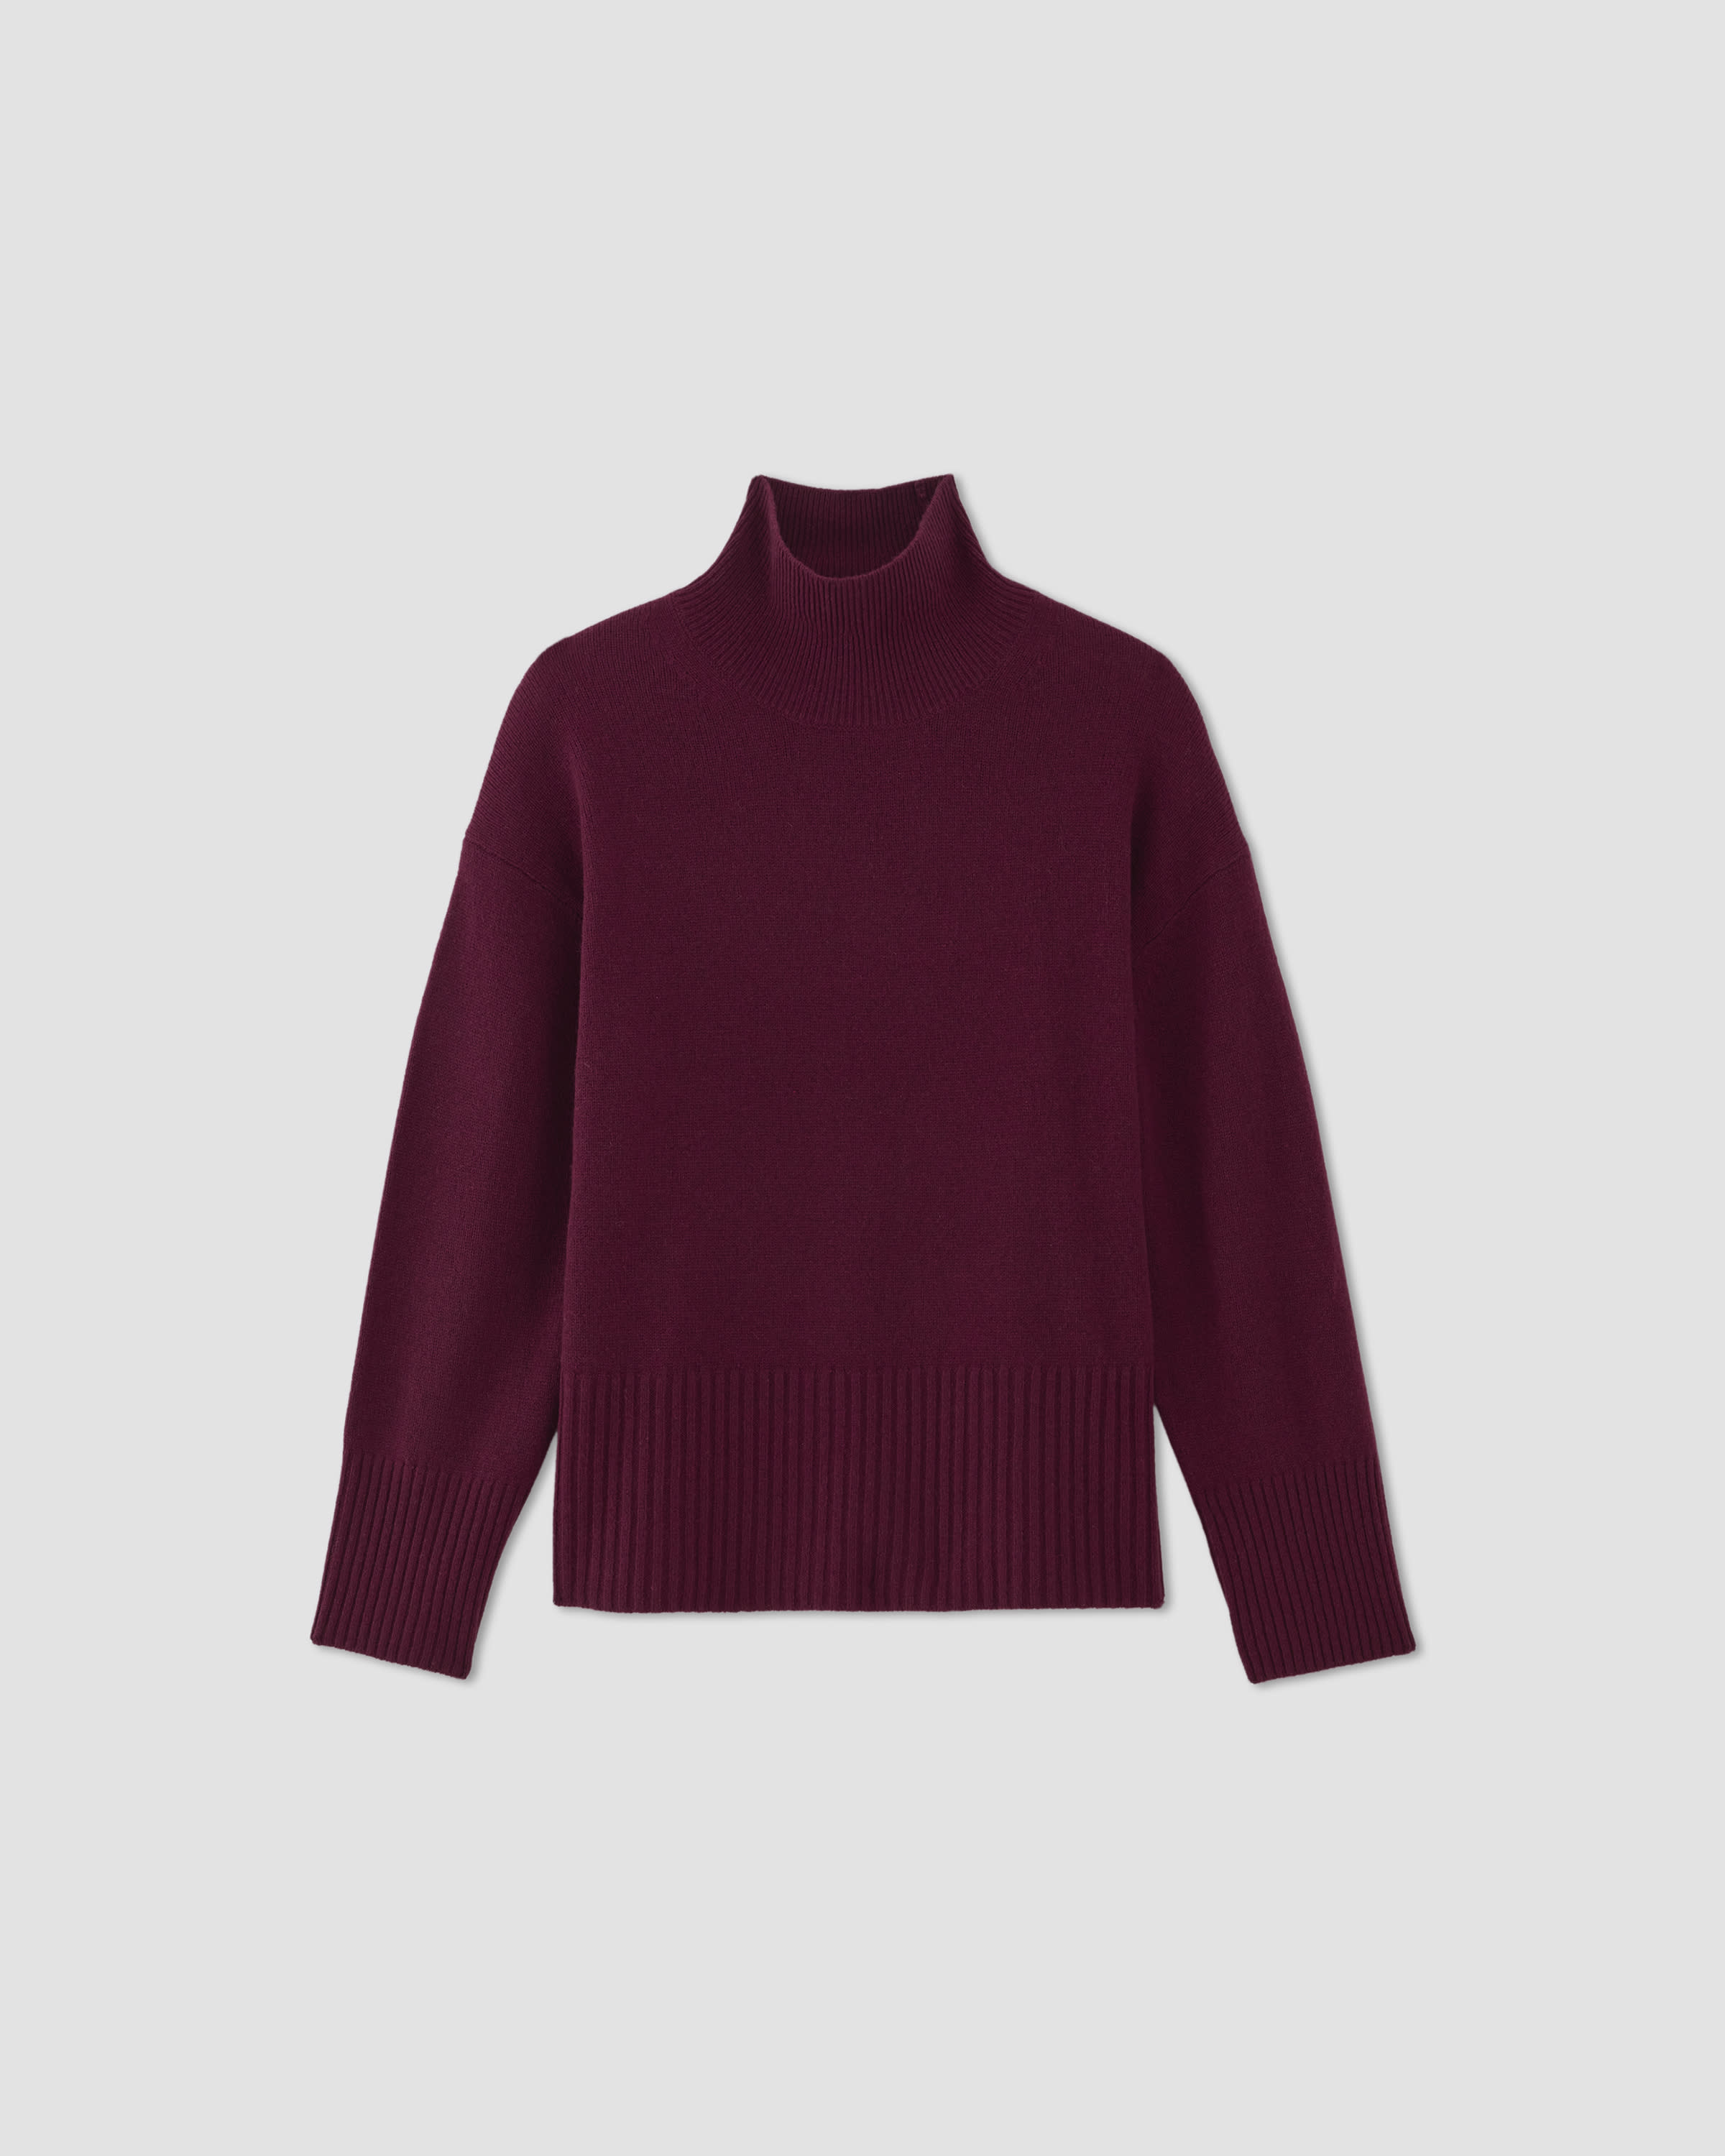 Polo sweater women • Compare & find best prices today »